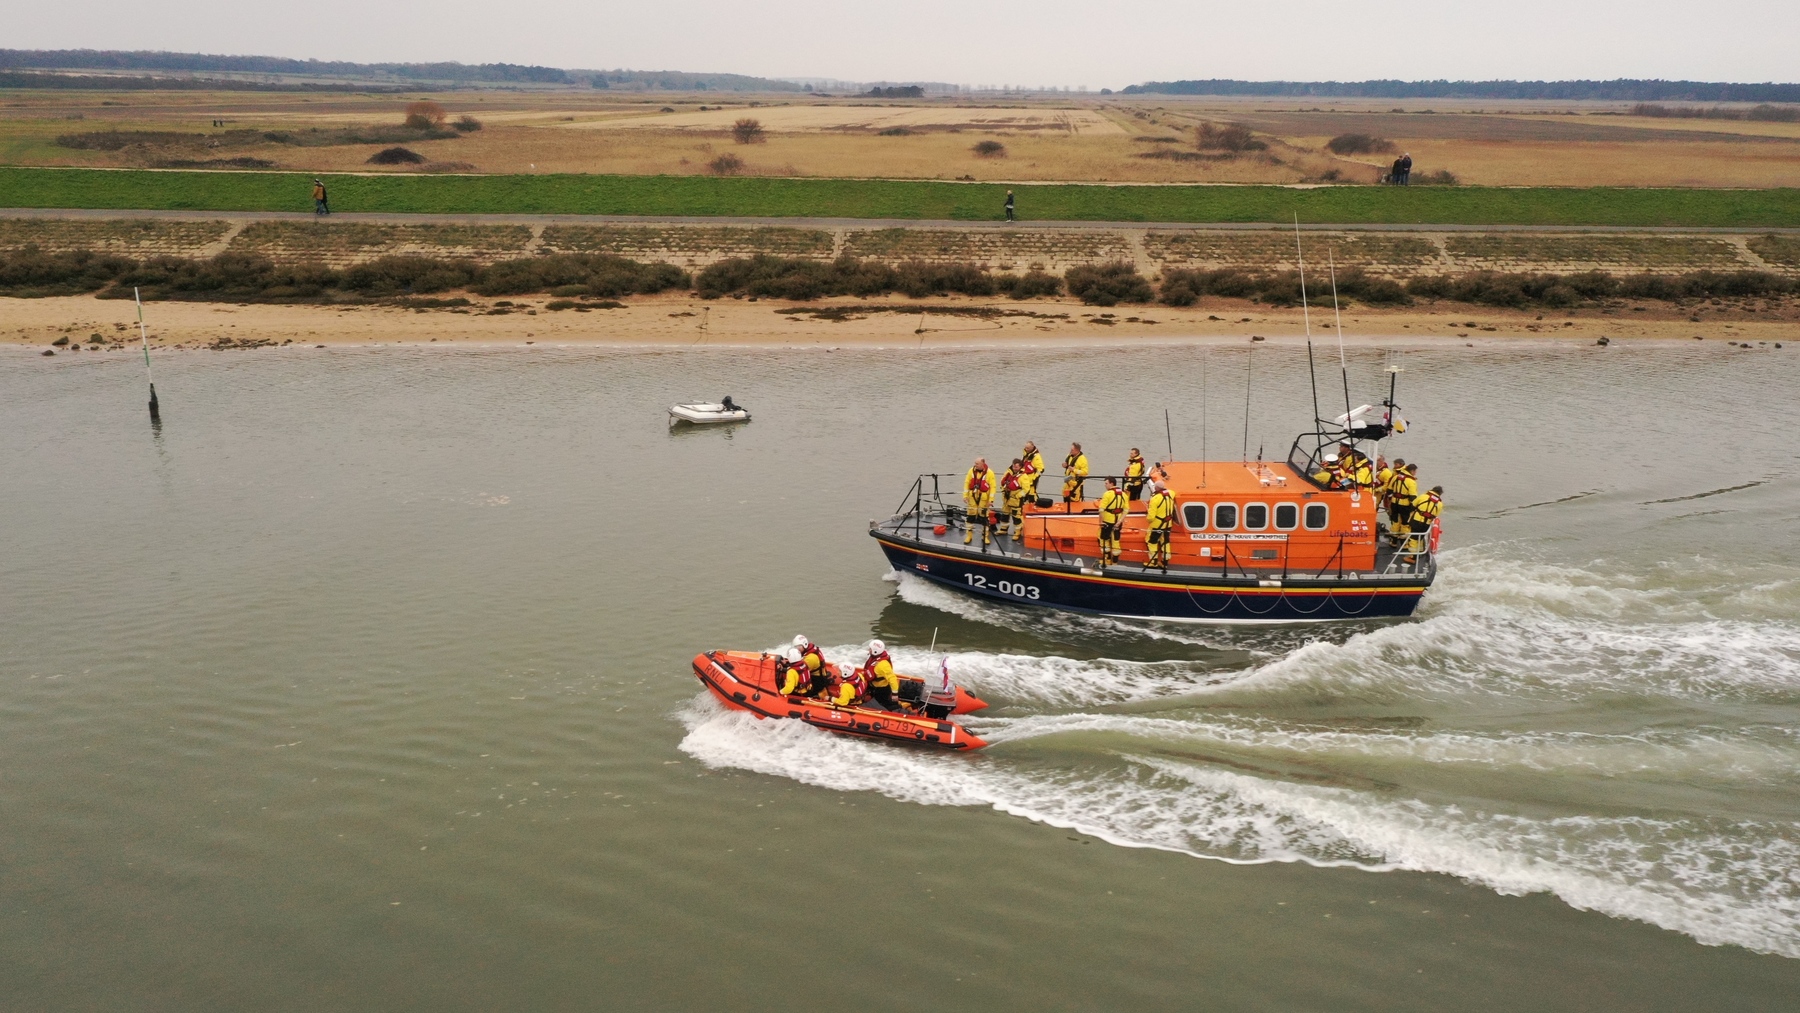 Mersey-class and inshore lifeboat running up to the quay